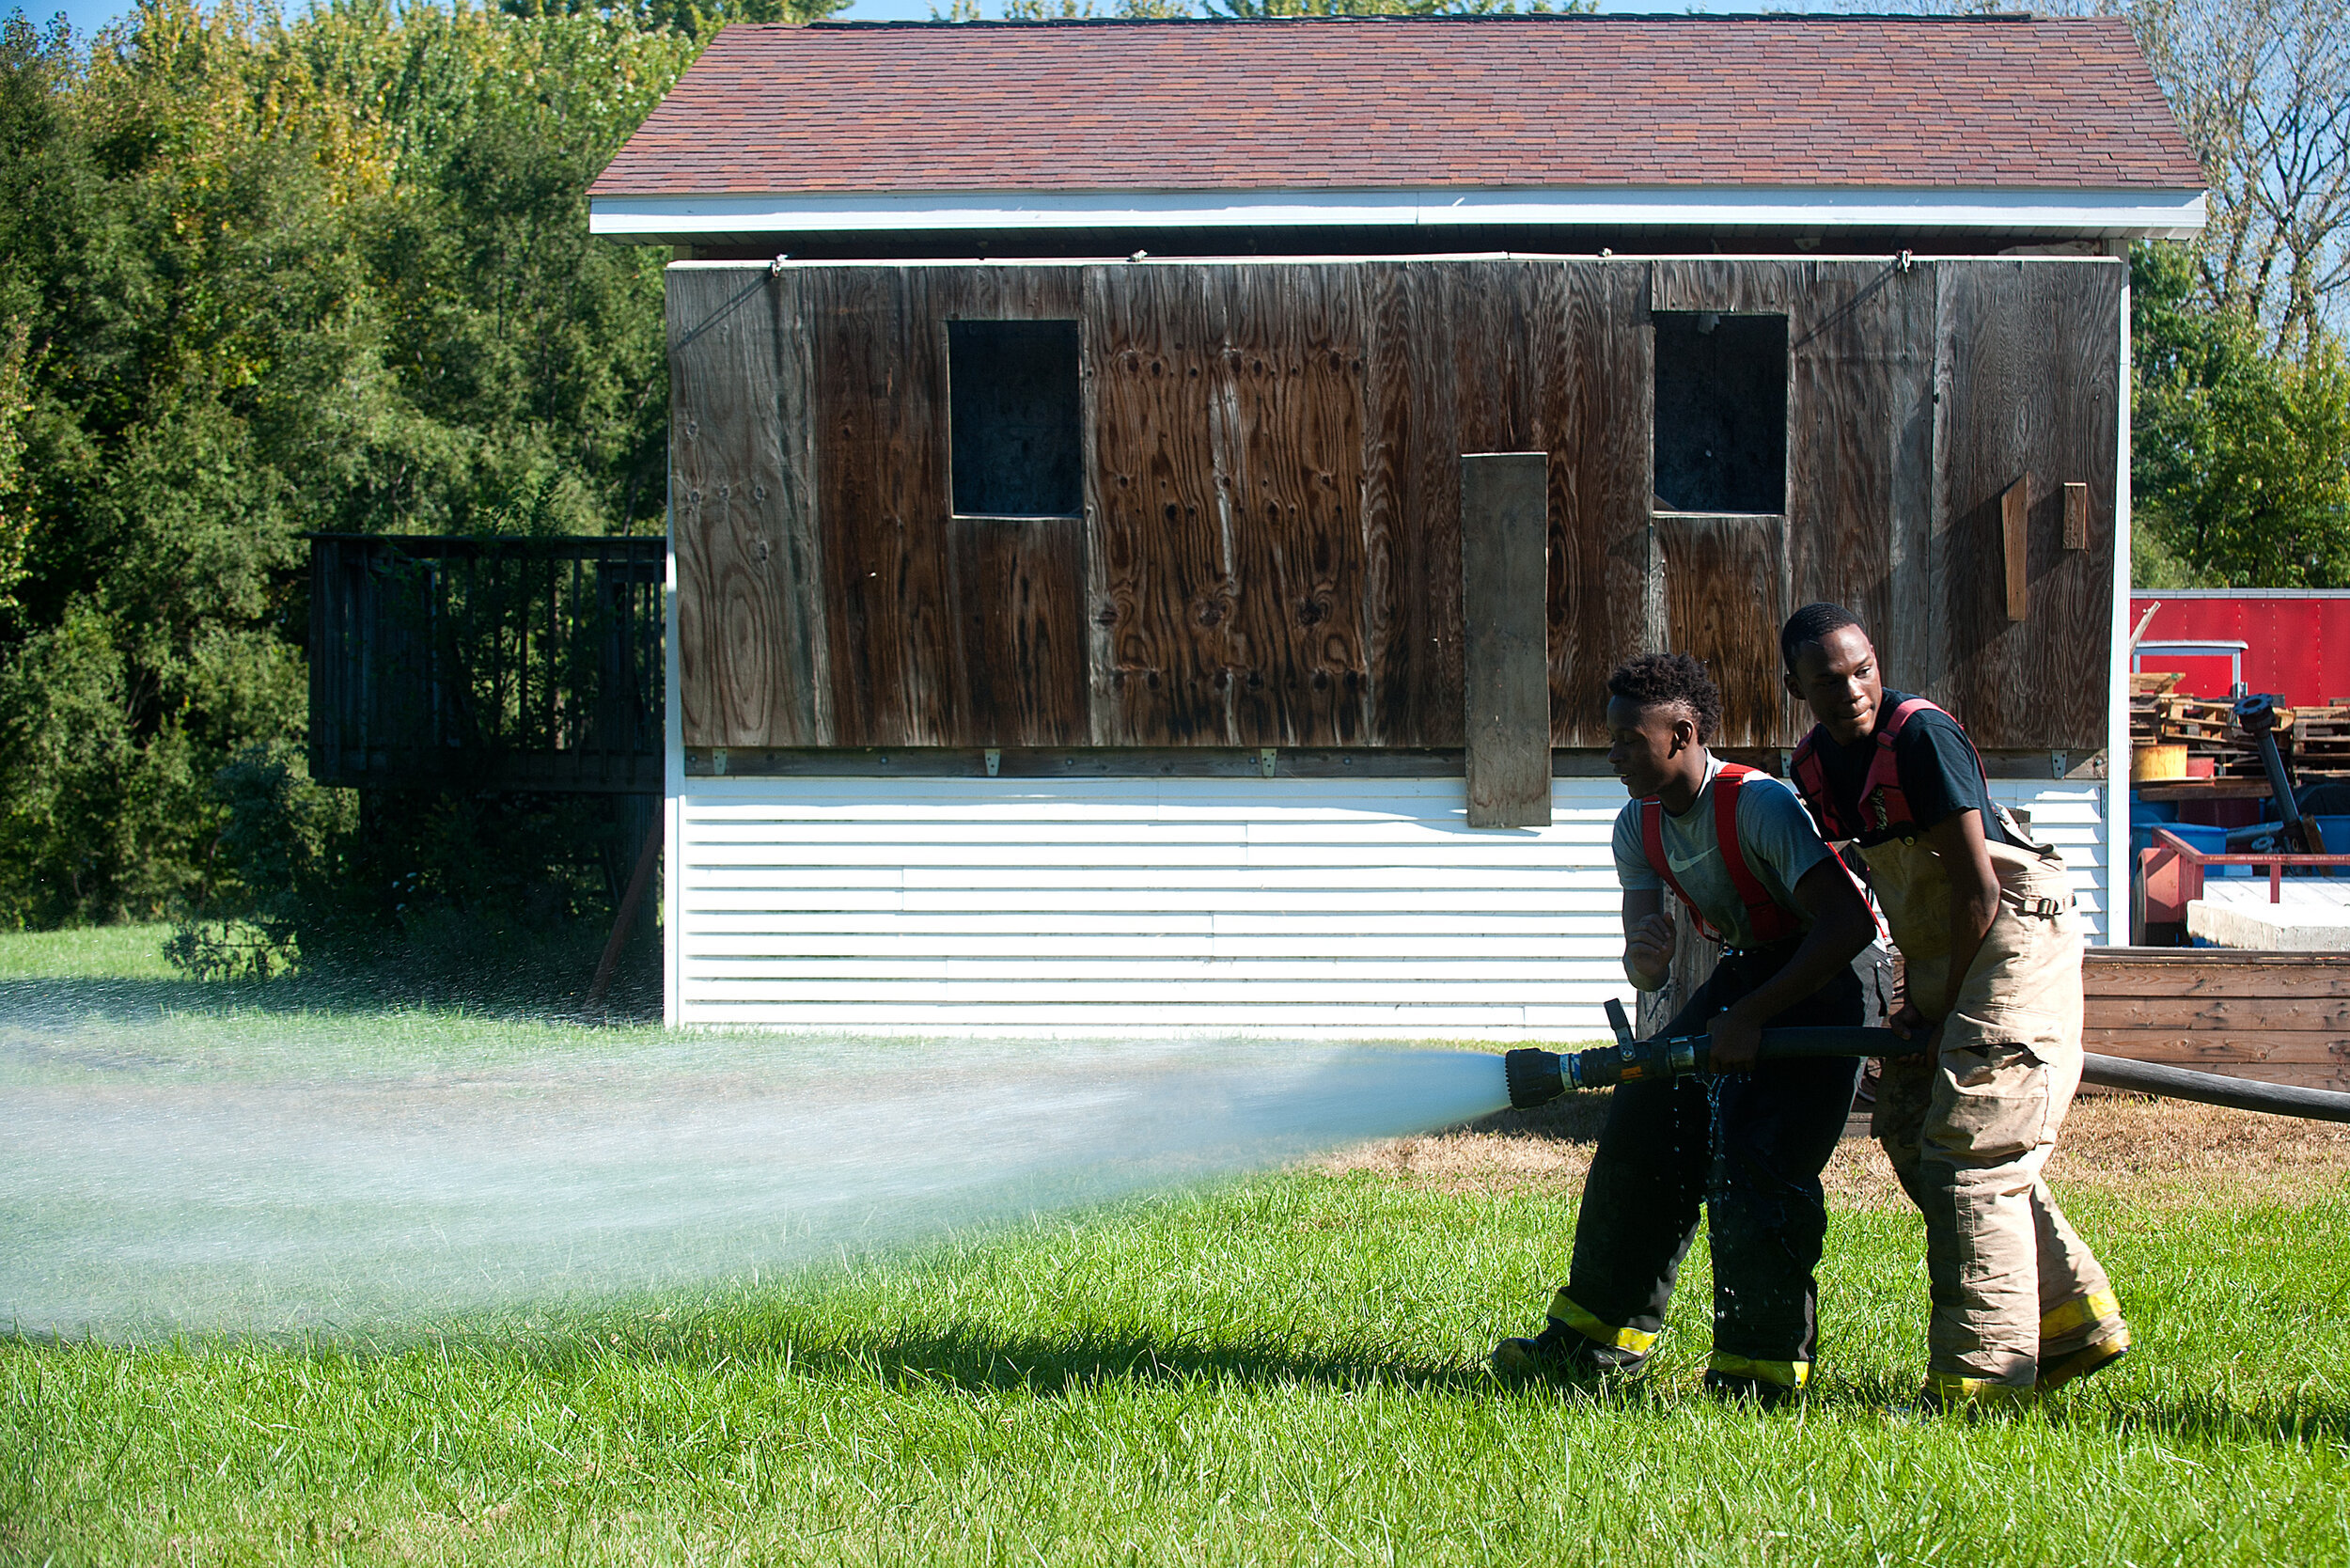  Peoria High School students Eryon Byrd and Keelan Bailey work together to operate a fire hose during training Sunday, Oct. 9, 2016, at the Peoria Fire Training Academy, 7130 N. Galena Road. 